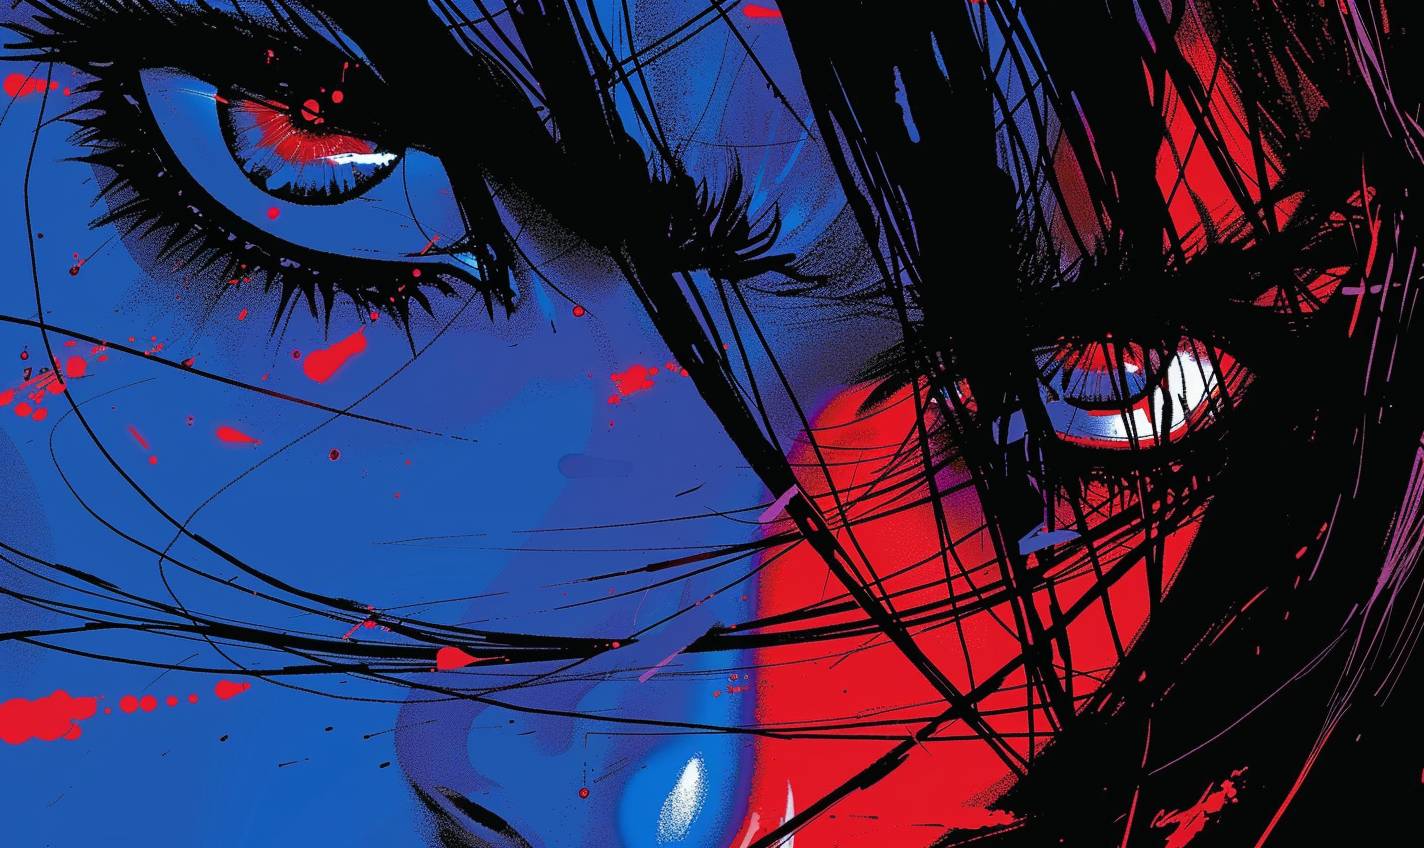 Dark and dramatic close-up manga comic-strip illustration by Frank Miller. Red and blue hues